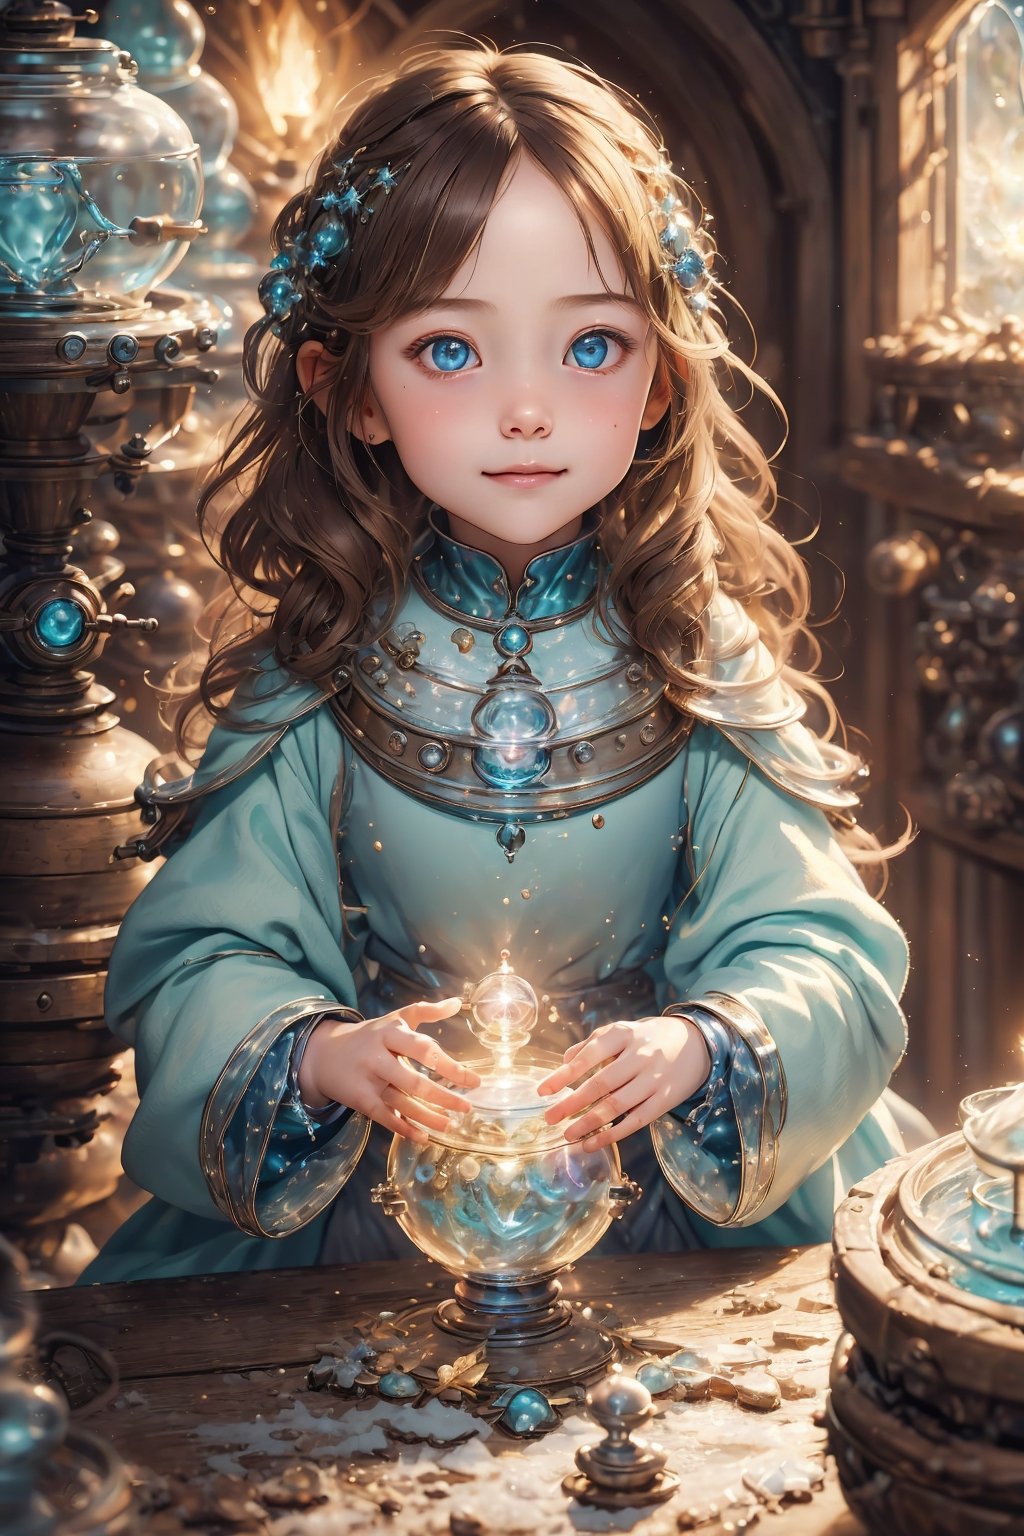 ((1girl, 6year old girl:1.5)),loli, petite girl, beautiful shining body, bangs,((darkbrown hair:1.3)),(aquamarine eyes), (perfect face),  top quality,  (official art :1.2),  (HDR:1.4),  UHD,  (beautiful and aesthetic:1.2),  high definition,  high quality,  detailed face,  high resolution,  highly detailed,  extremely detailed background,  (ultra detailed),  perfect lighting,  (photorealistic :1.37),  (8k, 16K,  best quality,  masterpiece:1.2),  (ultra highres:1.0), realistic,  epic, 1girl, really cute young ginger girls' smiles, creating a joyful atmosphere, potion mistress, magic, (lots of colorful potions :1.3), glowy smoke, tetradic colors, bubly, (detailed alchemist room:1.6), volumetric lights,  very detailed potions and alchemy laboratory scenery,  colorful,  dynamic,  visually rich,  whimsical,  fairy tale, 
(long hair,  cute hairstyle:1.5), absurdres,  (cinematic shot:1.4),  (muted colors,  dim colors,  soothing tones:1.3) ,dynamic angle, wide shot, the source of light is the moon light,happiness,  (perfect hands,  perfect fingers :1.4),  big dream eyes, (perfect body:1.4), glasstech, Realistic, (atelier style:1.3), Sect,1girl,ice